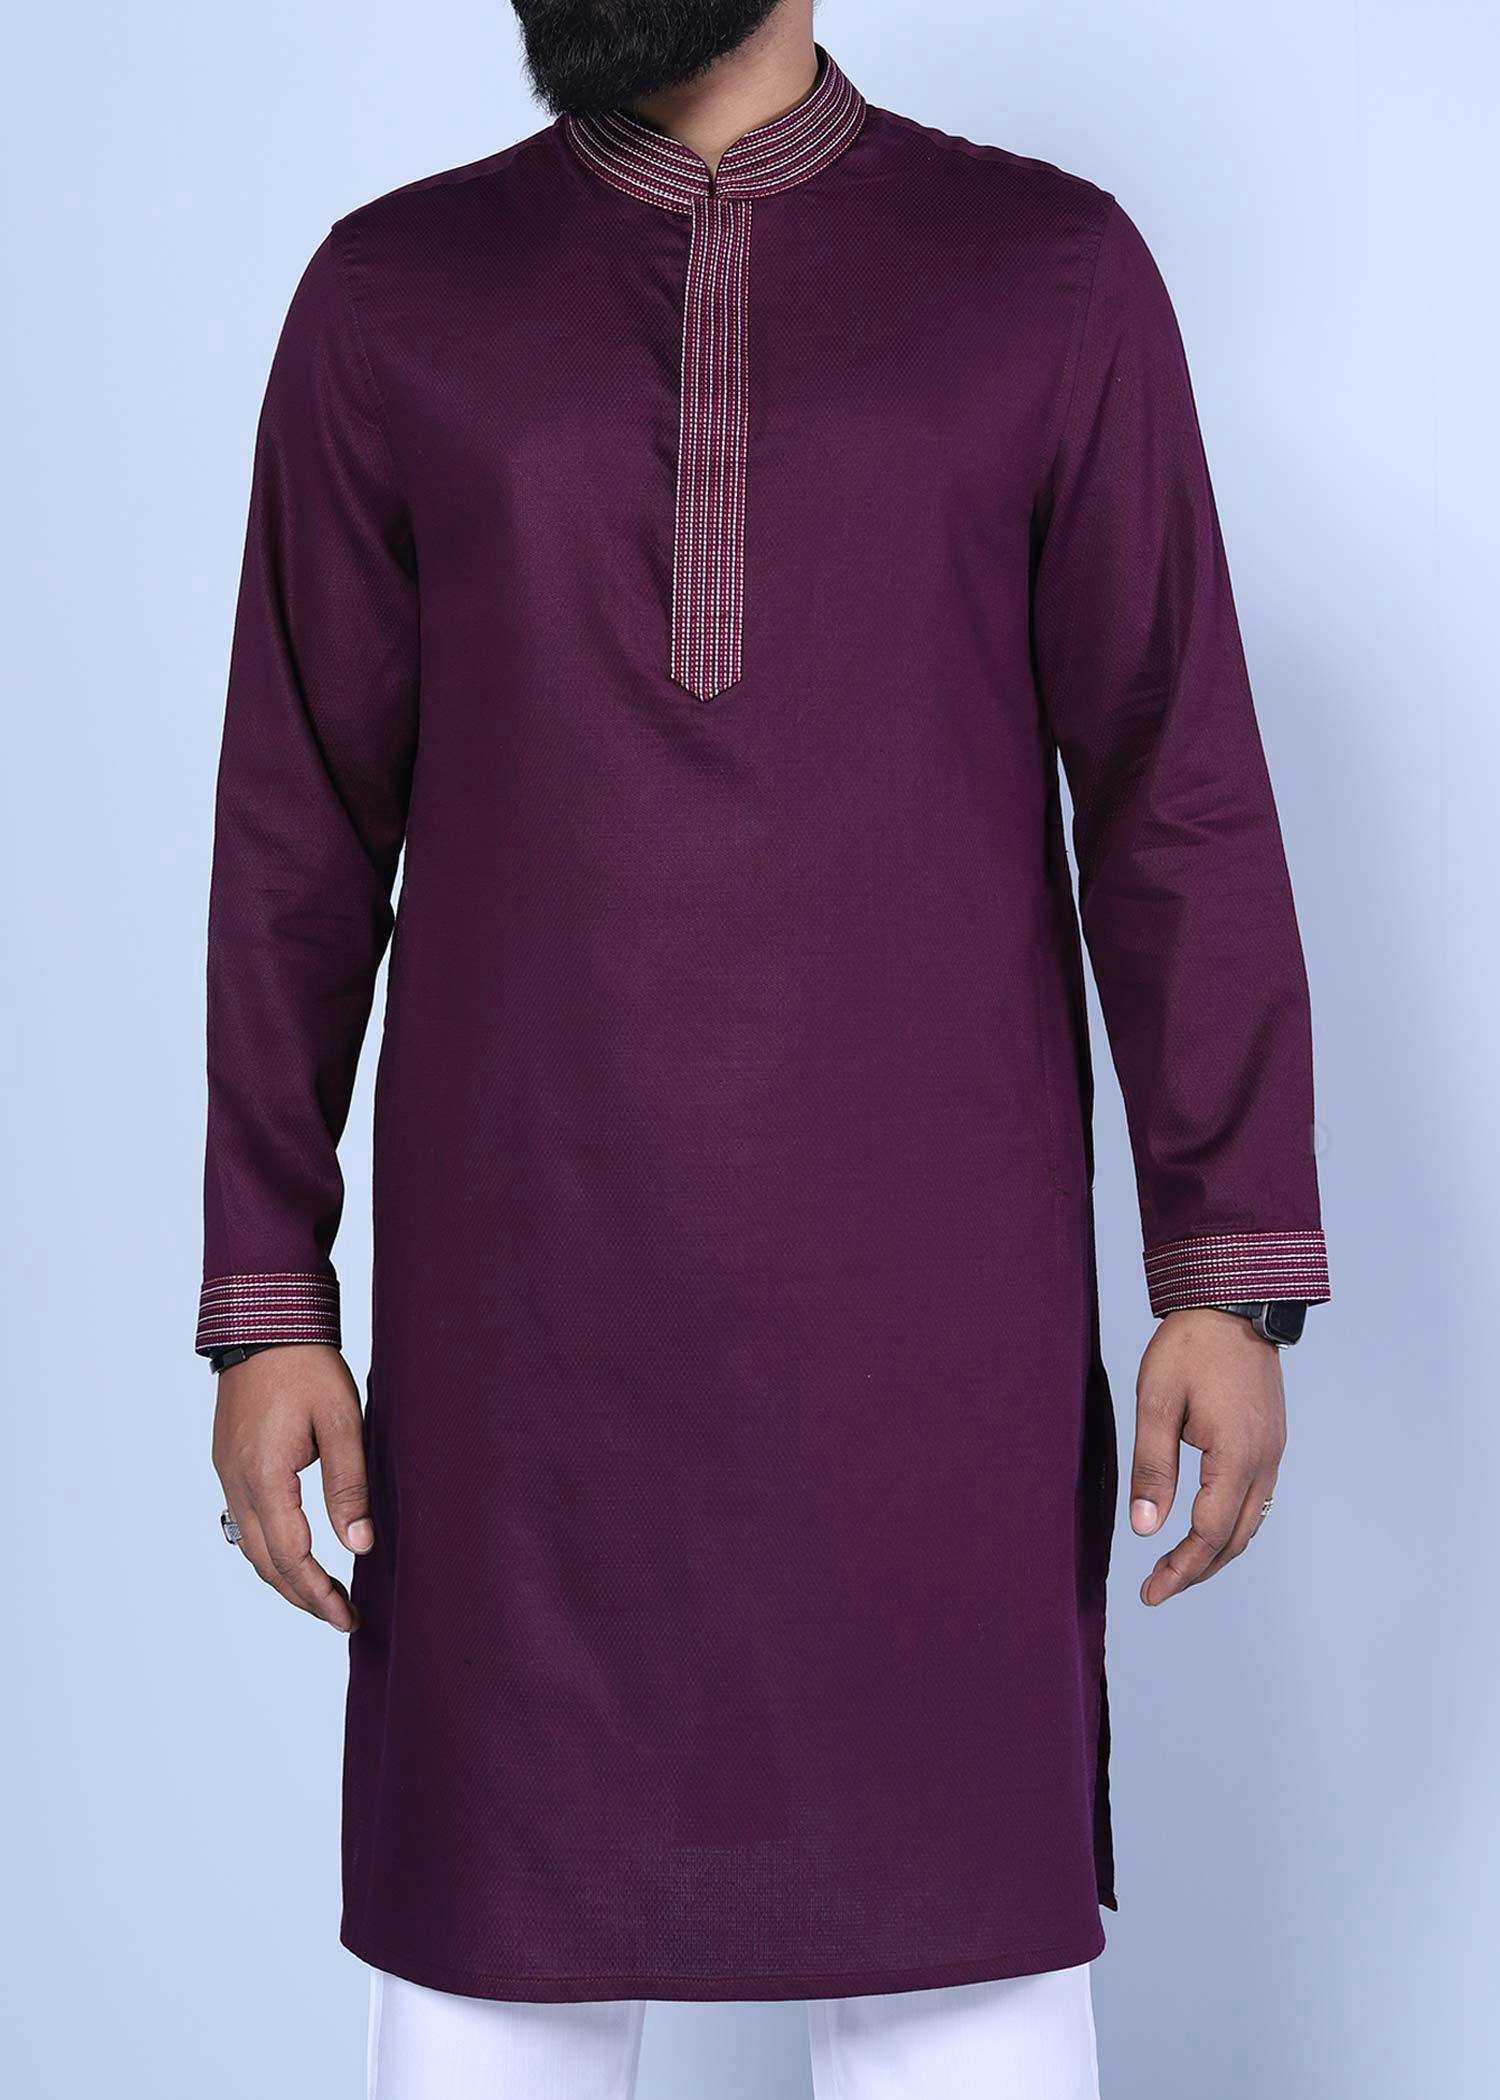 cairo xiv maroon color half front view